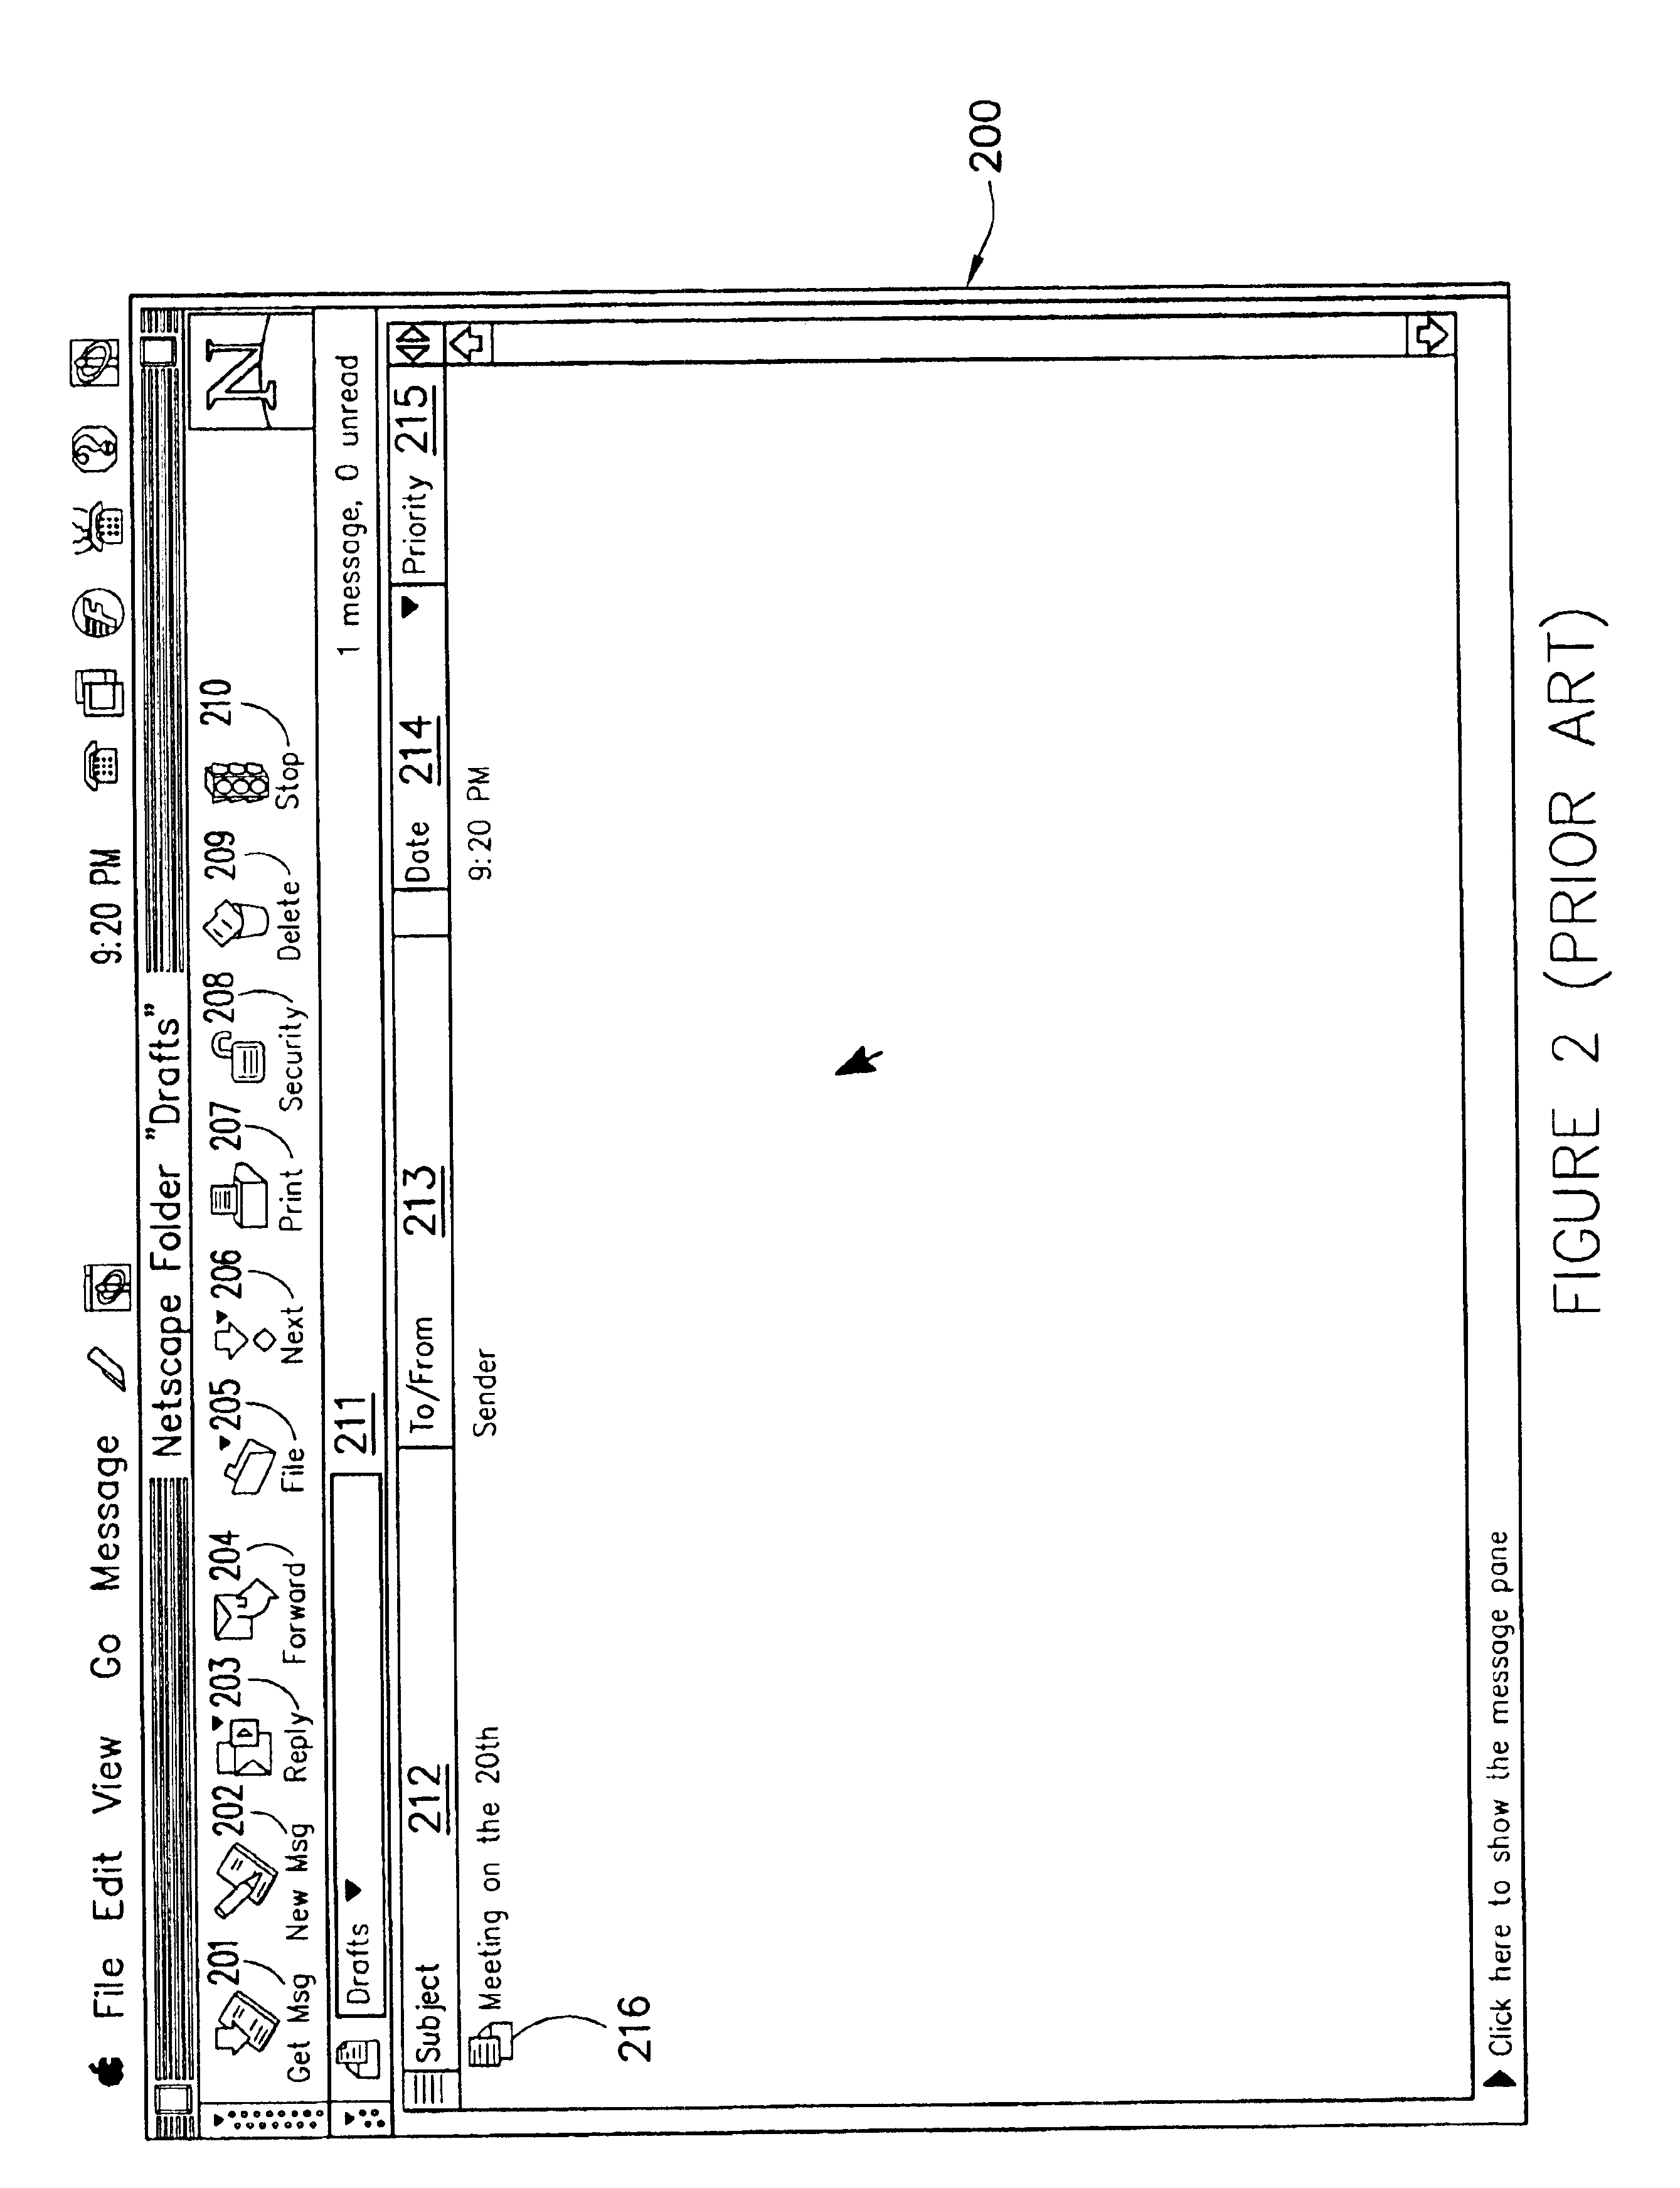 Method and apparatus for selecting attachments